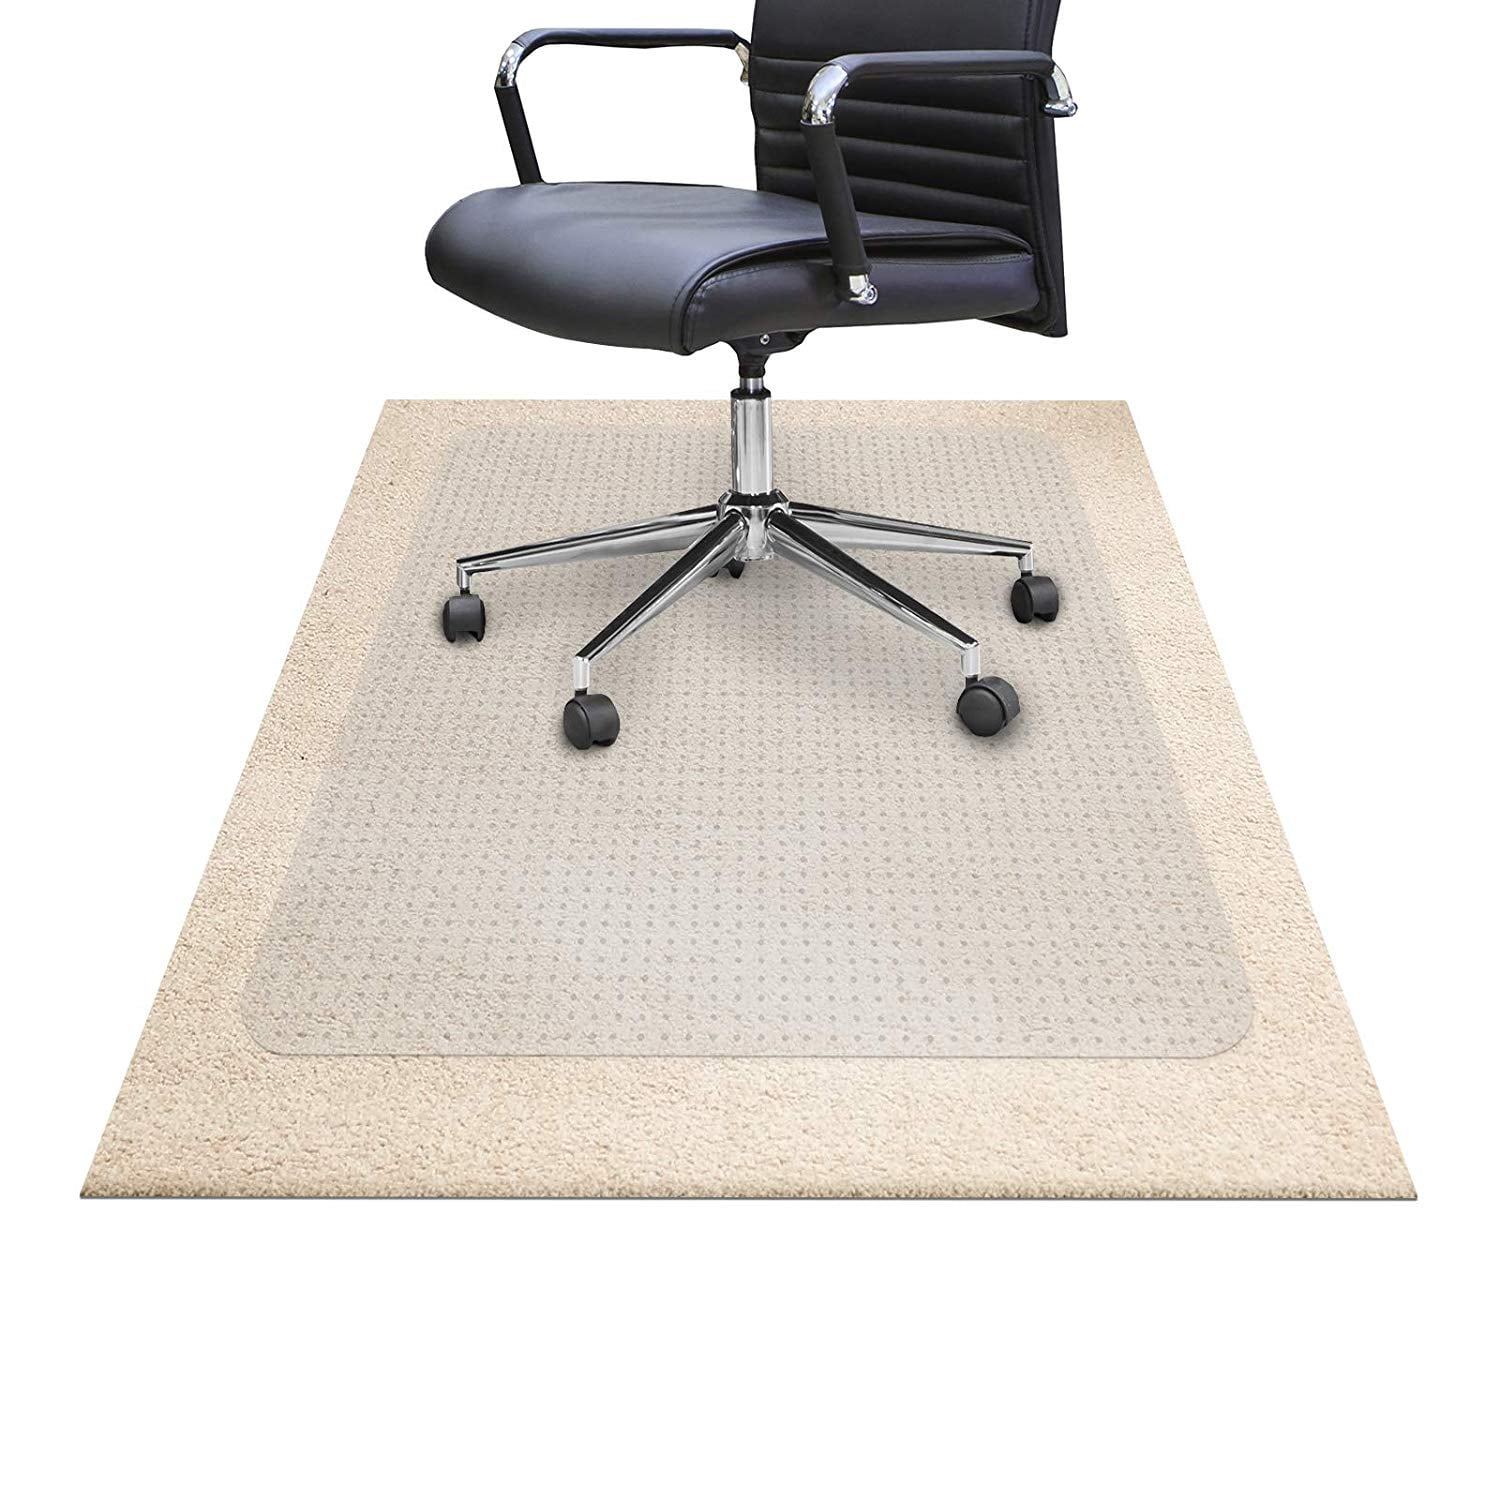 36"x48" PVC Home Office Chair Floor Mat Rectangle With Lip Hard Floor Mat Square 